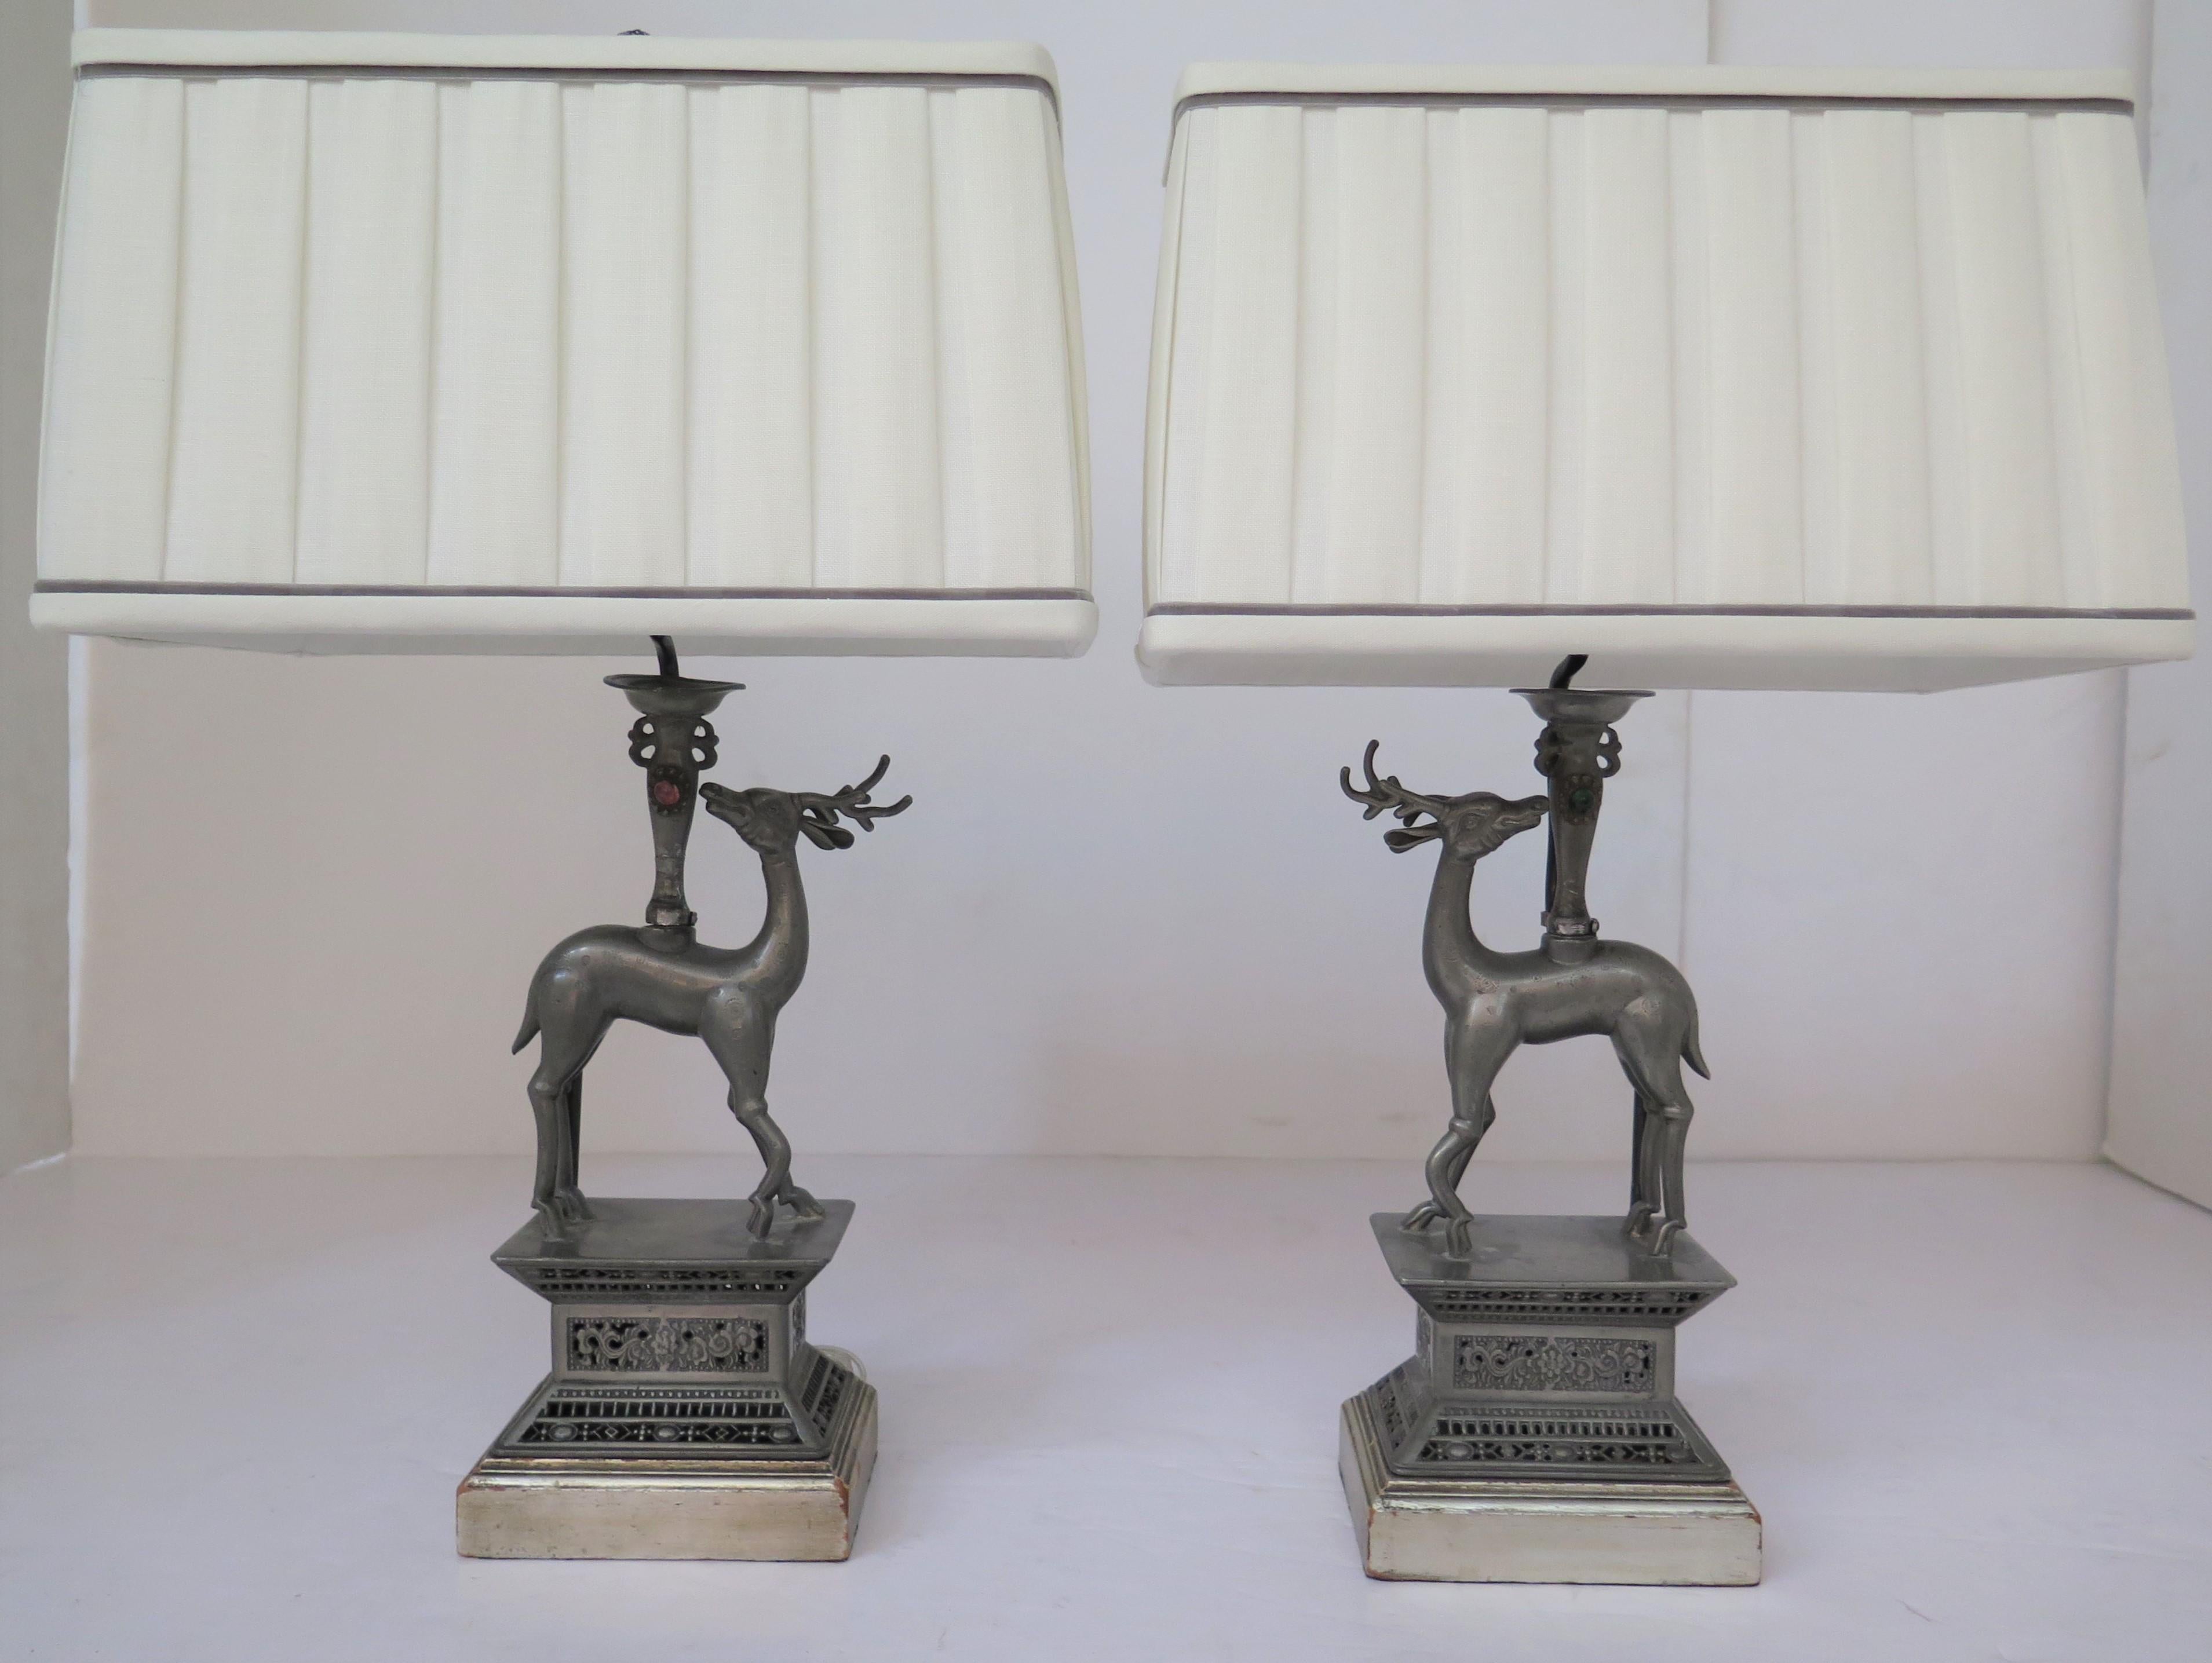 a handsome pair of pewter Chinese Art Deco deer table lamps on silver gilt wooden bases with custom pleated rectangular box shades, China, circa 1920s

22'' H x 14.5'' W x 9.5'' D

6'' x 4.5'' base 